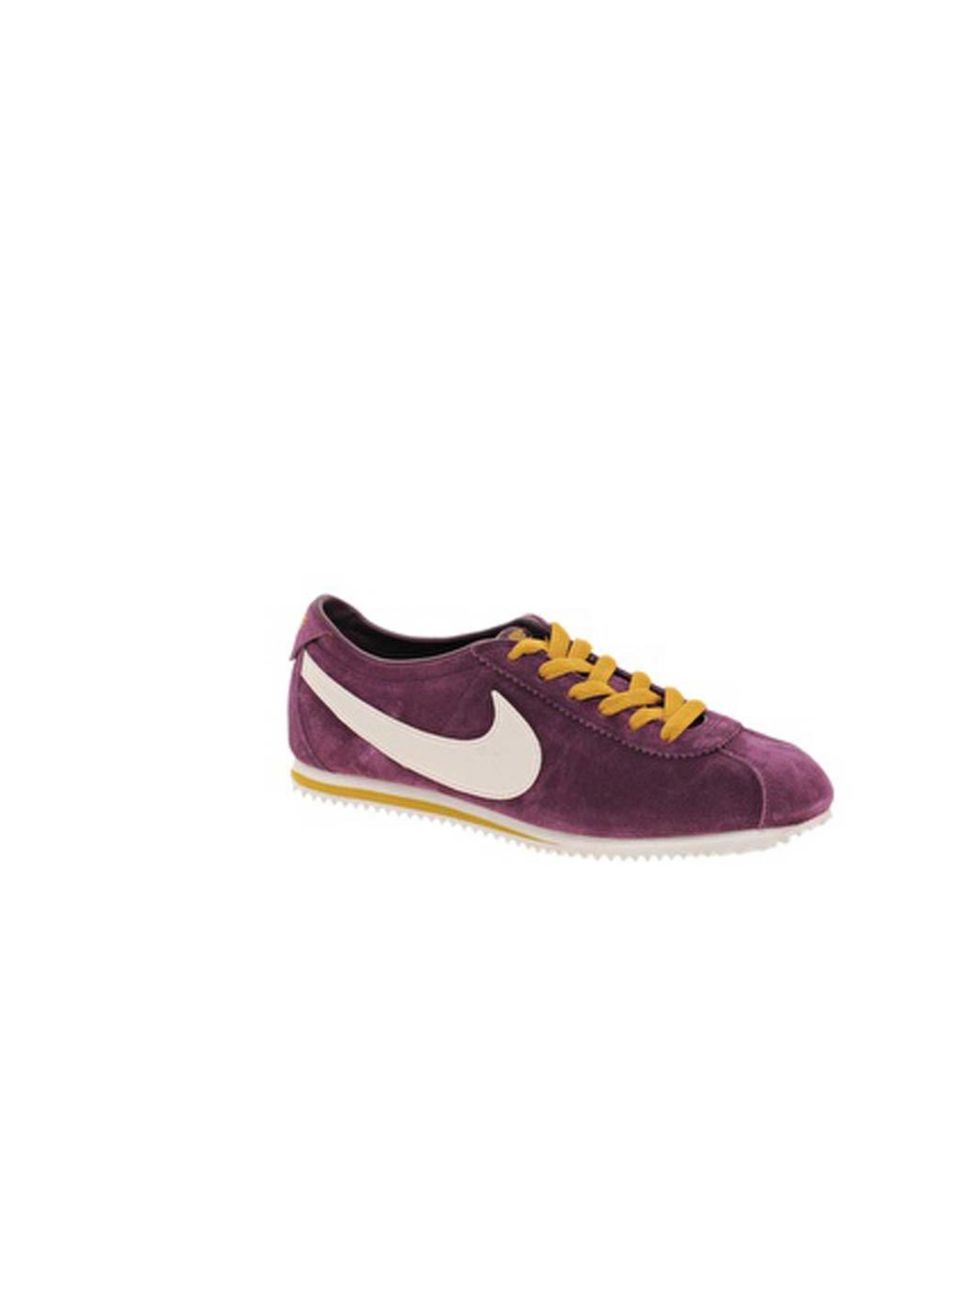 <p>Nike burgundy suede trainers £65 at <a href="http://www.asos.com/Nike/Nike-Lady-Cortez-Burgundy-Suede-Trainers/Prod/pgeproduct.aspx?iid=2394669&amp;cid=6456&amp;sh=0&amp;pge=0&amp;pgesize=-1&amp;sort=-1&amp;clr=Burgundy">ASOS</a></p>